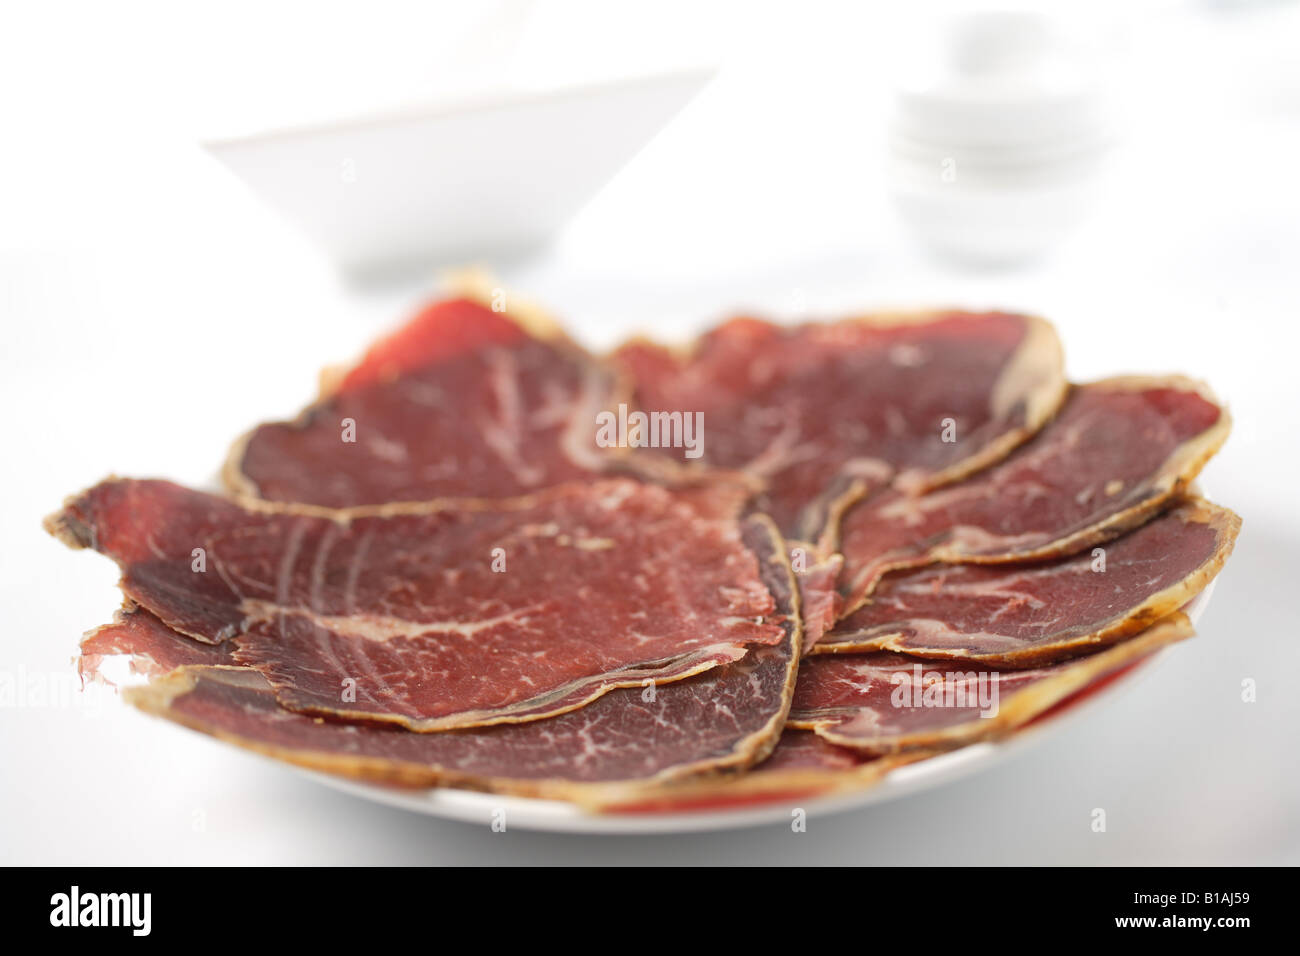 A piece of cecina from Leon (air dried and smoked cured beef made from the  hind leg of cattle from León, Spain Stock Photo - Alamy